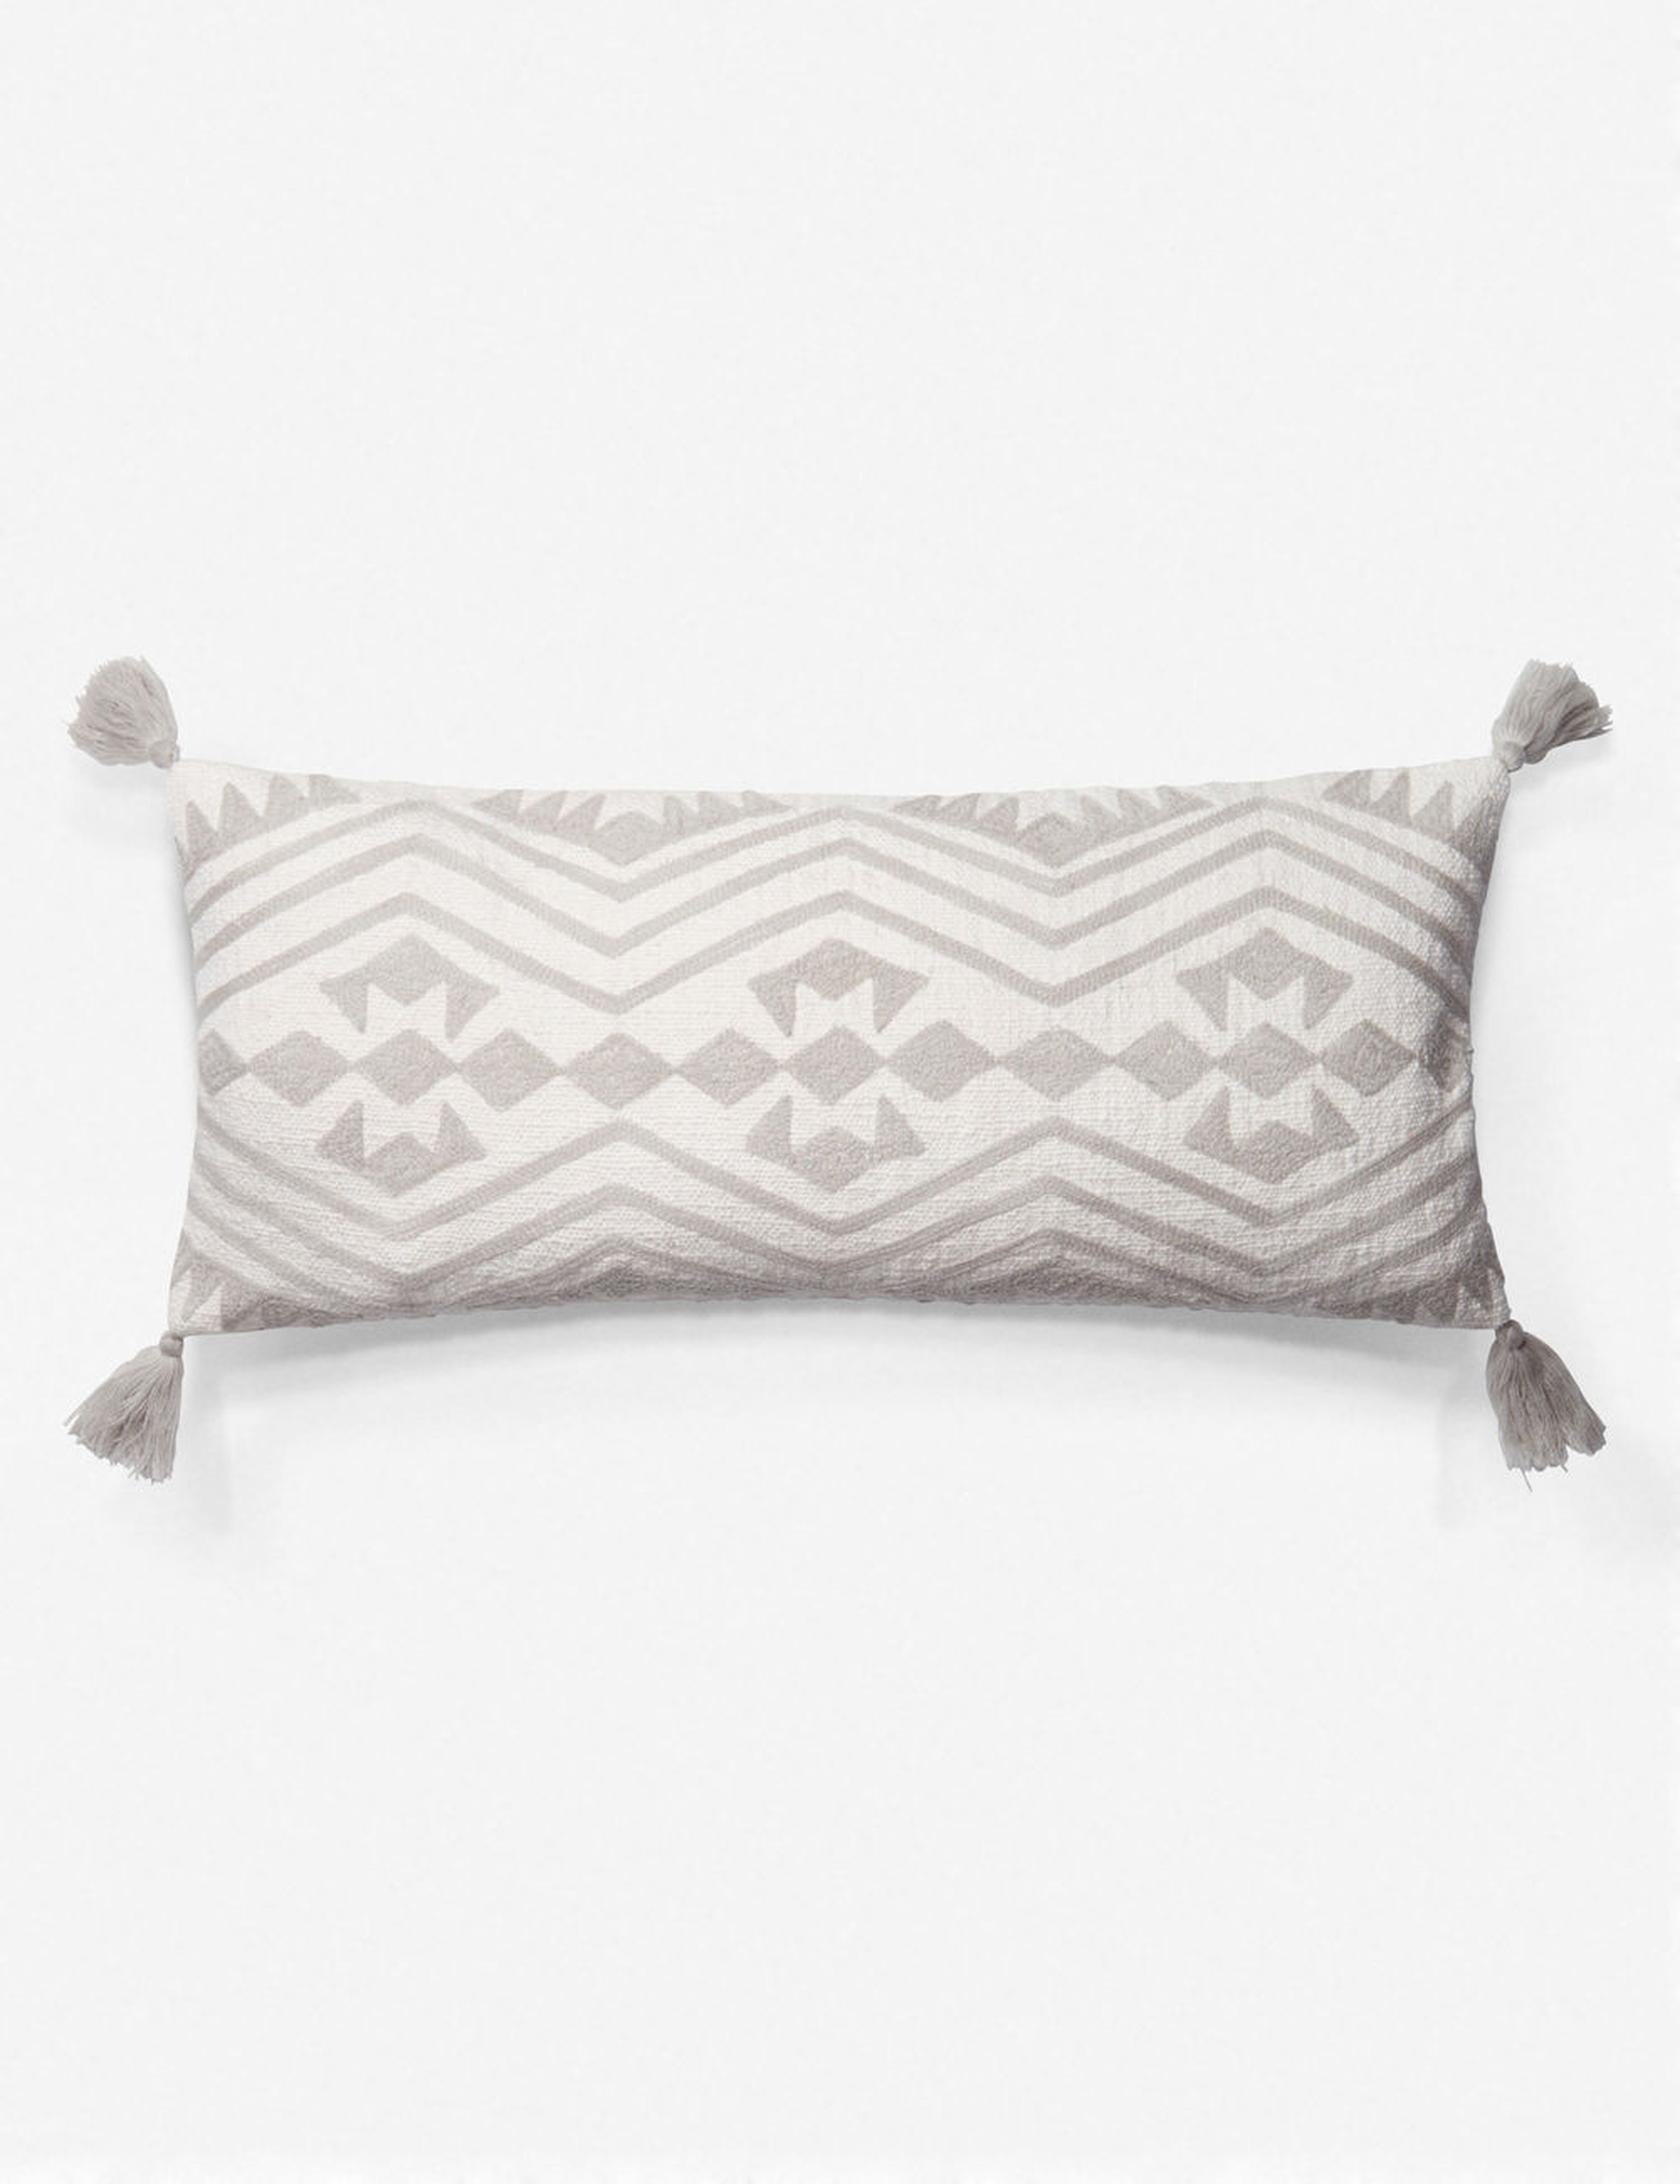 MARIN LUMBAR PILLOW, WHITE AND GRAY -- Down Feather Filled 27"x12" - Lulu and Georgia